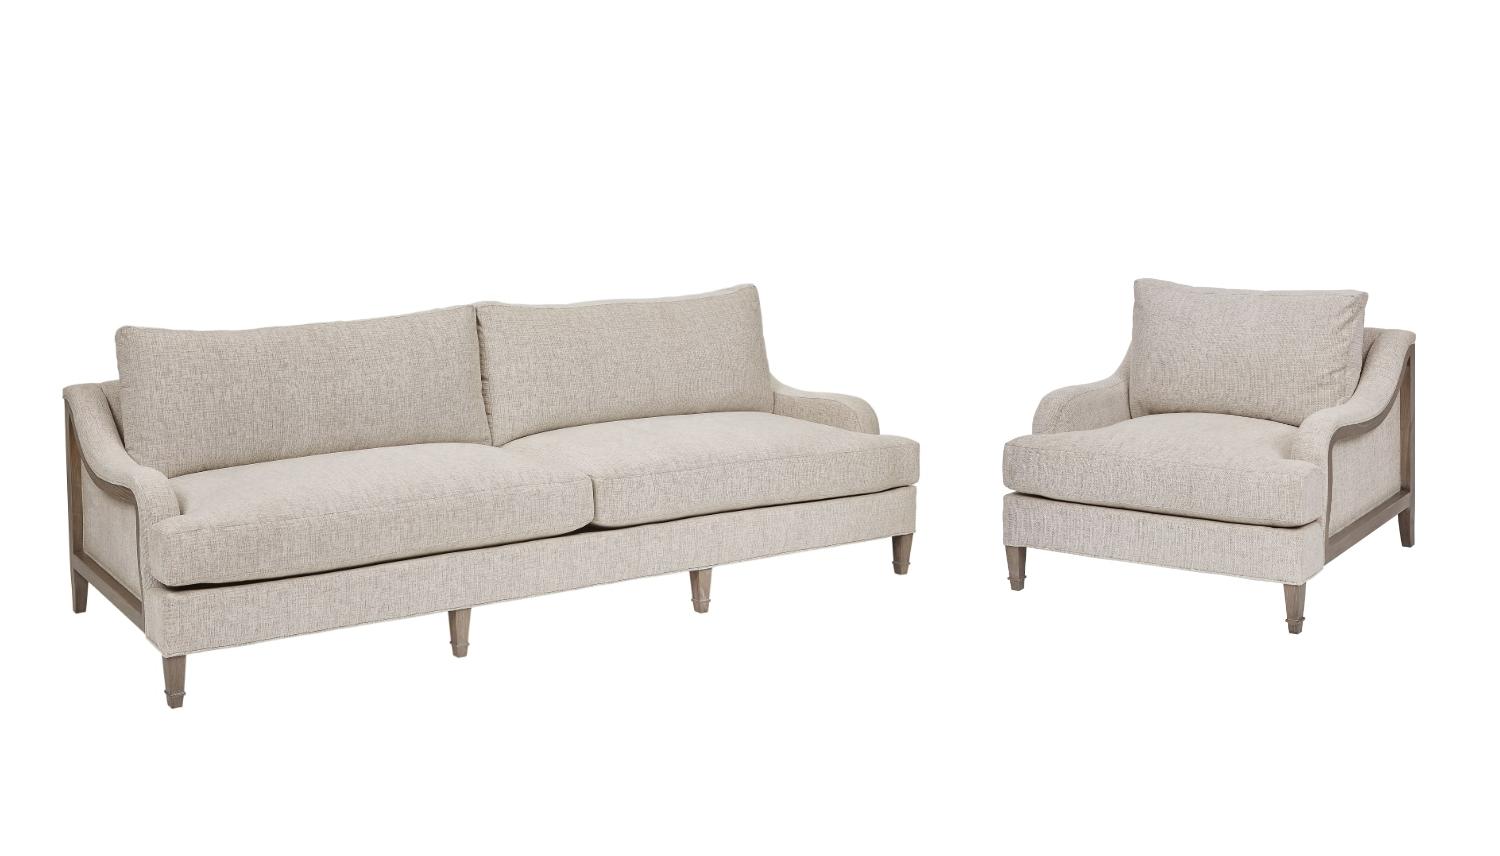 Modern, Classic, Traditional Sofa and Chair Tresco 760521-5303-2pcs in White, Beige Fabric